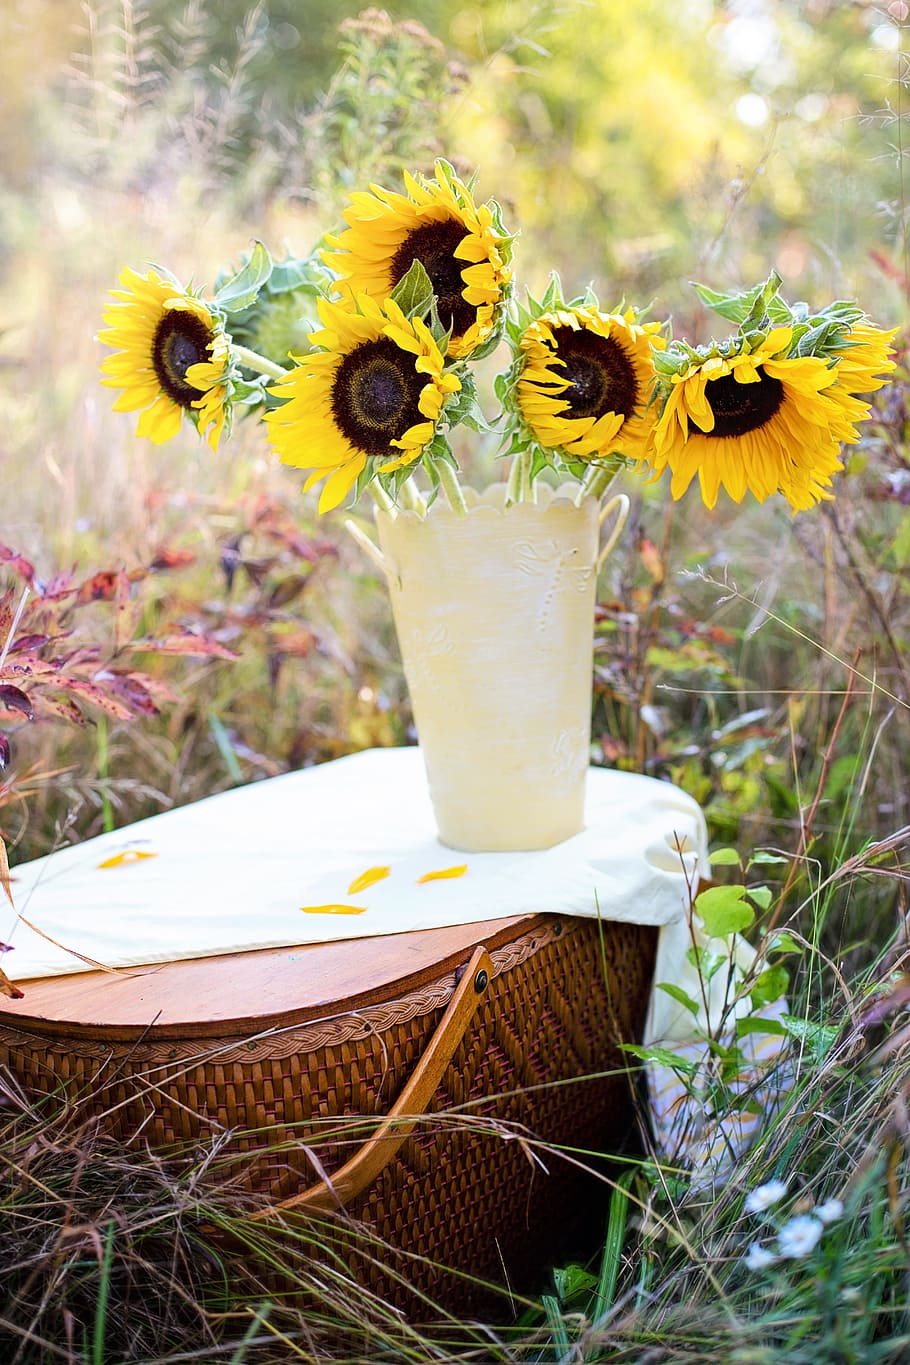 yellow, sunflowers, vase, brown, wicker picnic basket, fall, autumn, bouquet, flowers, thanksgiving